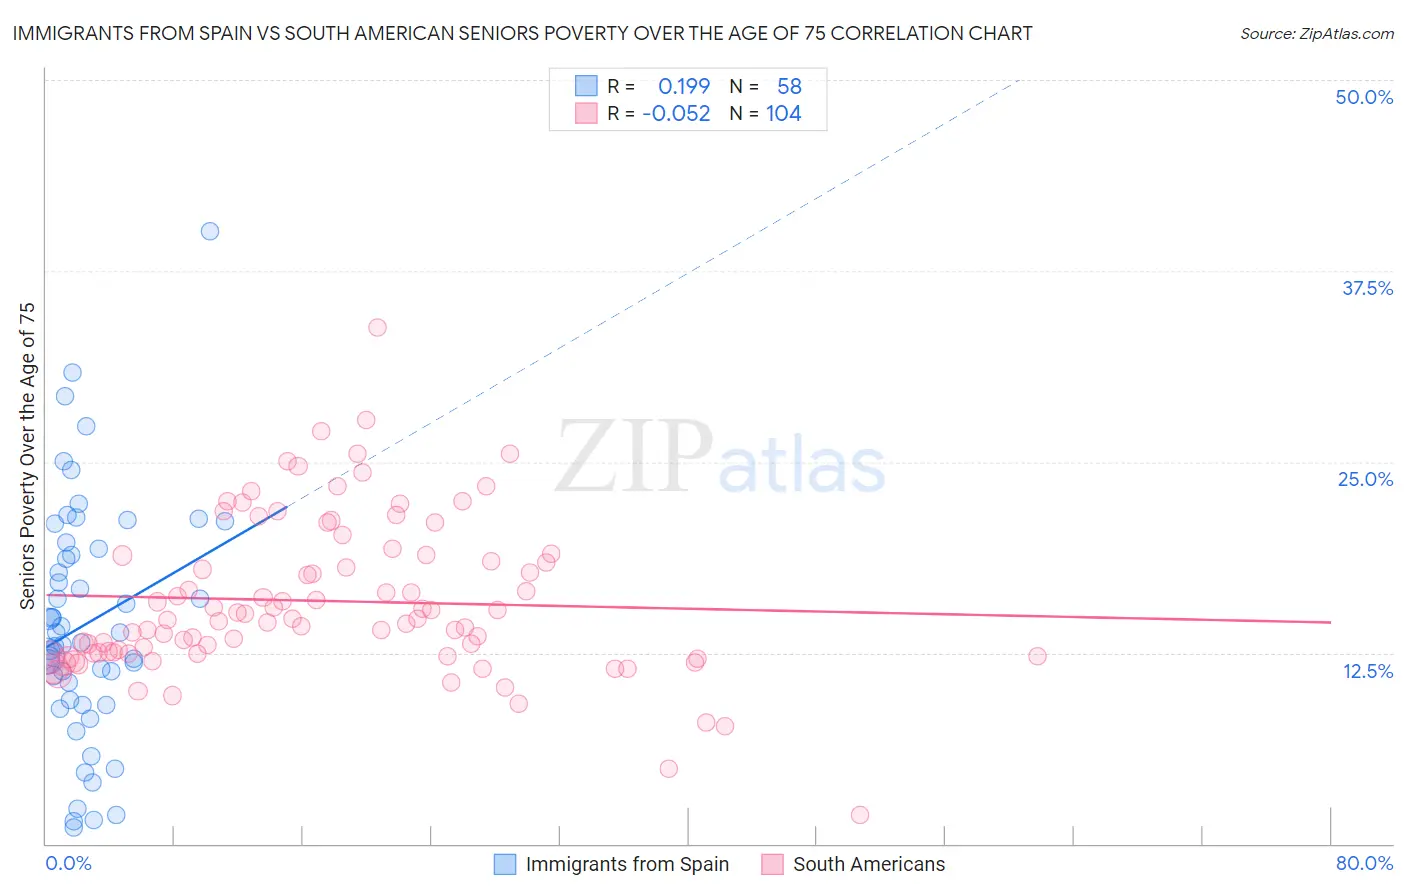 Immigrants from Spain vs South American Seniors Poverty Over the Age of 75